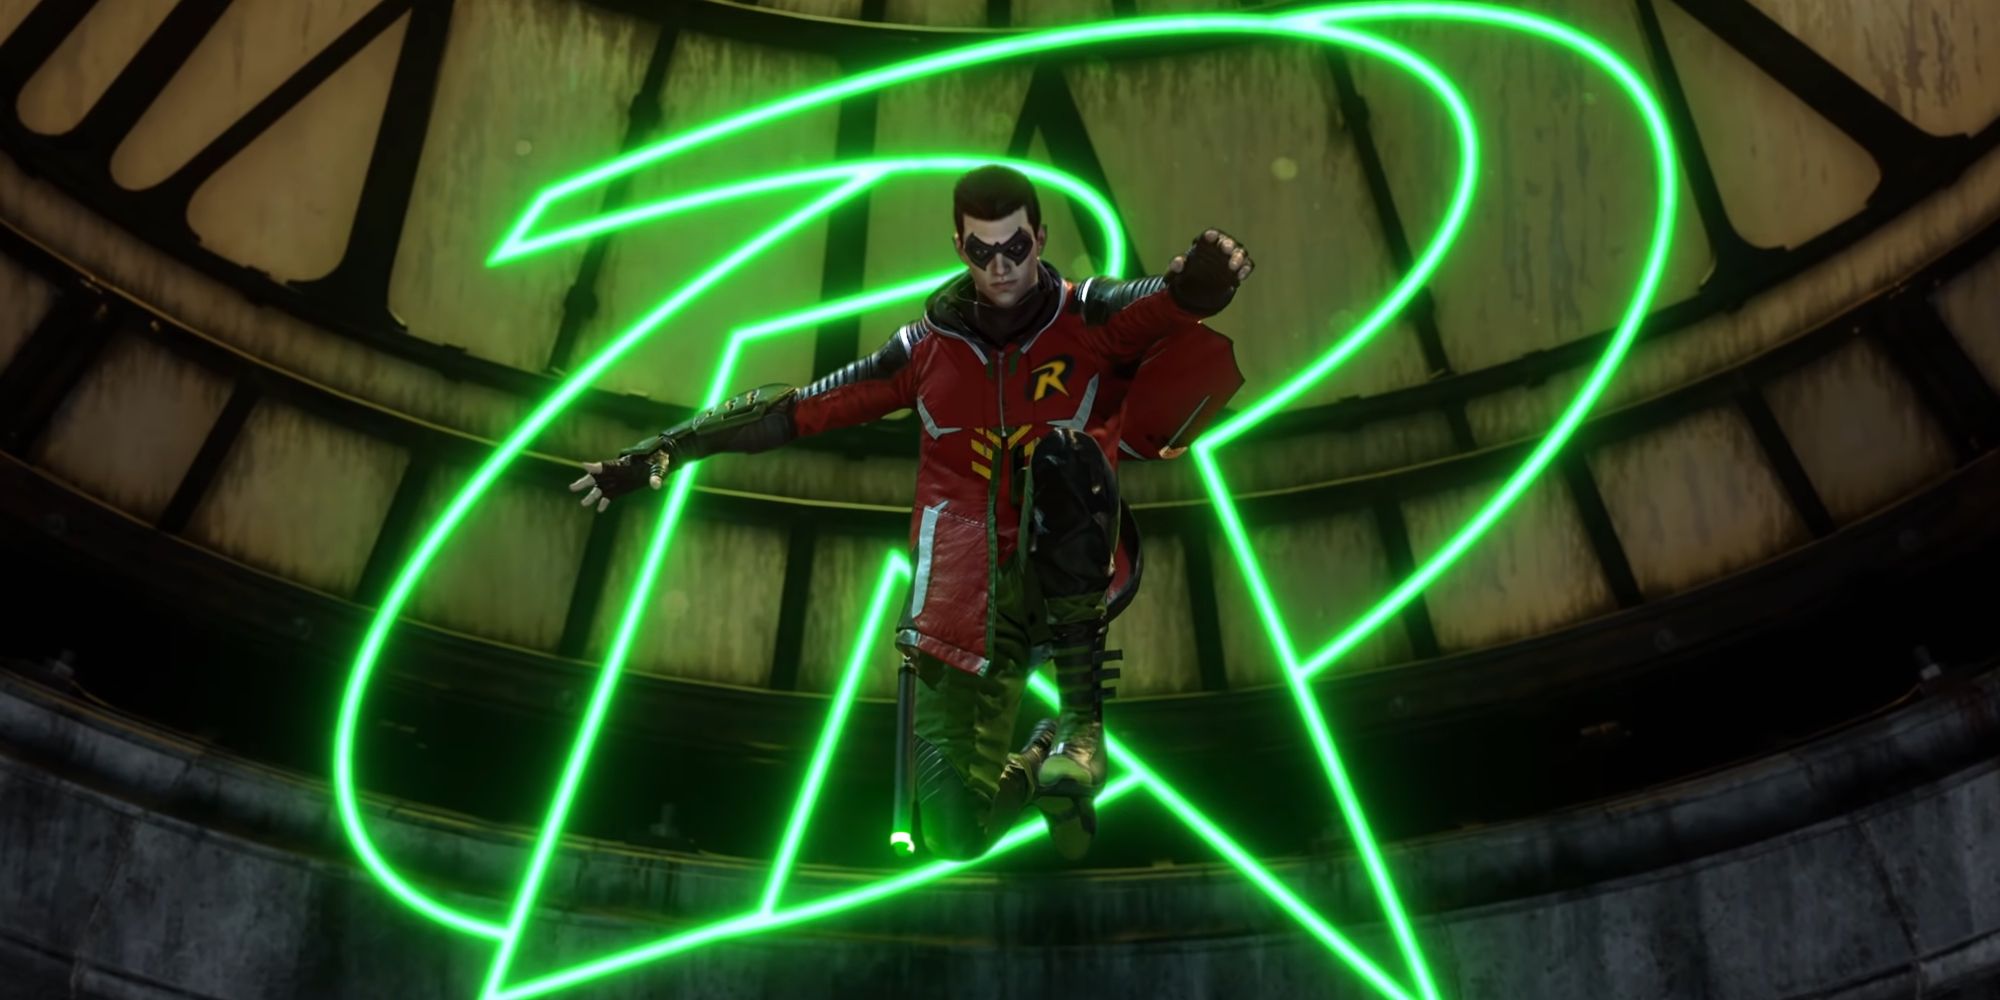 Tim Drake as Robin leaping into action in Gotham Knights